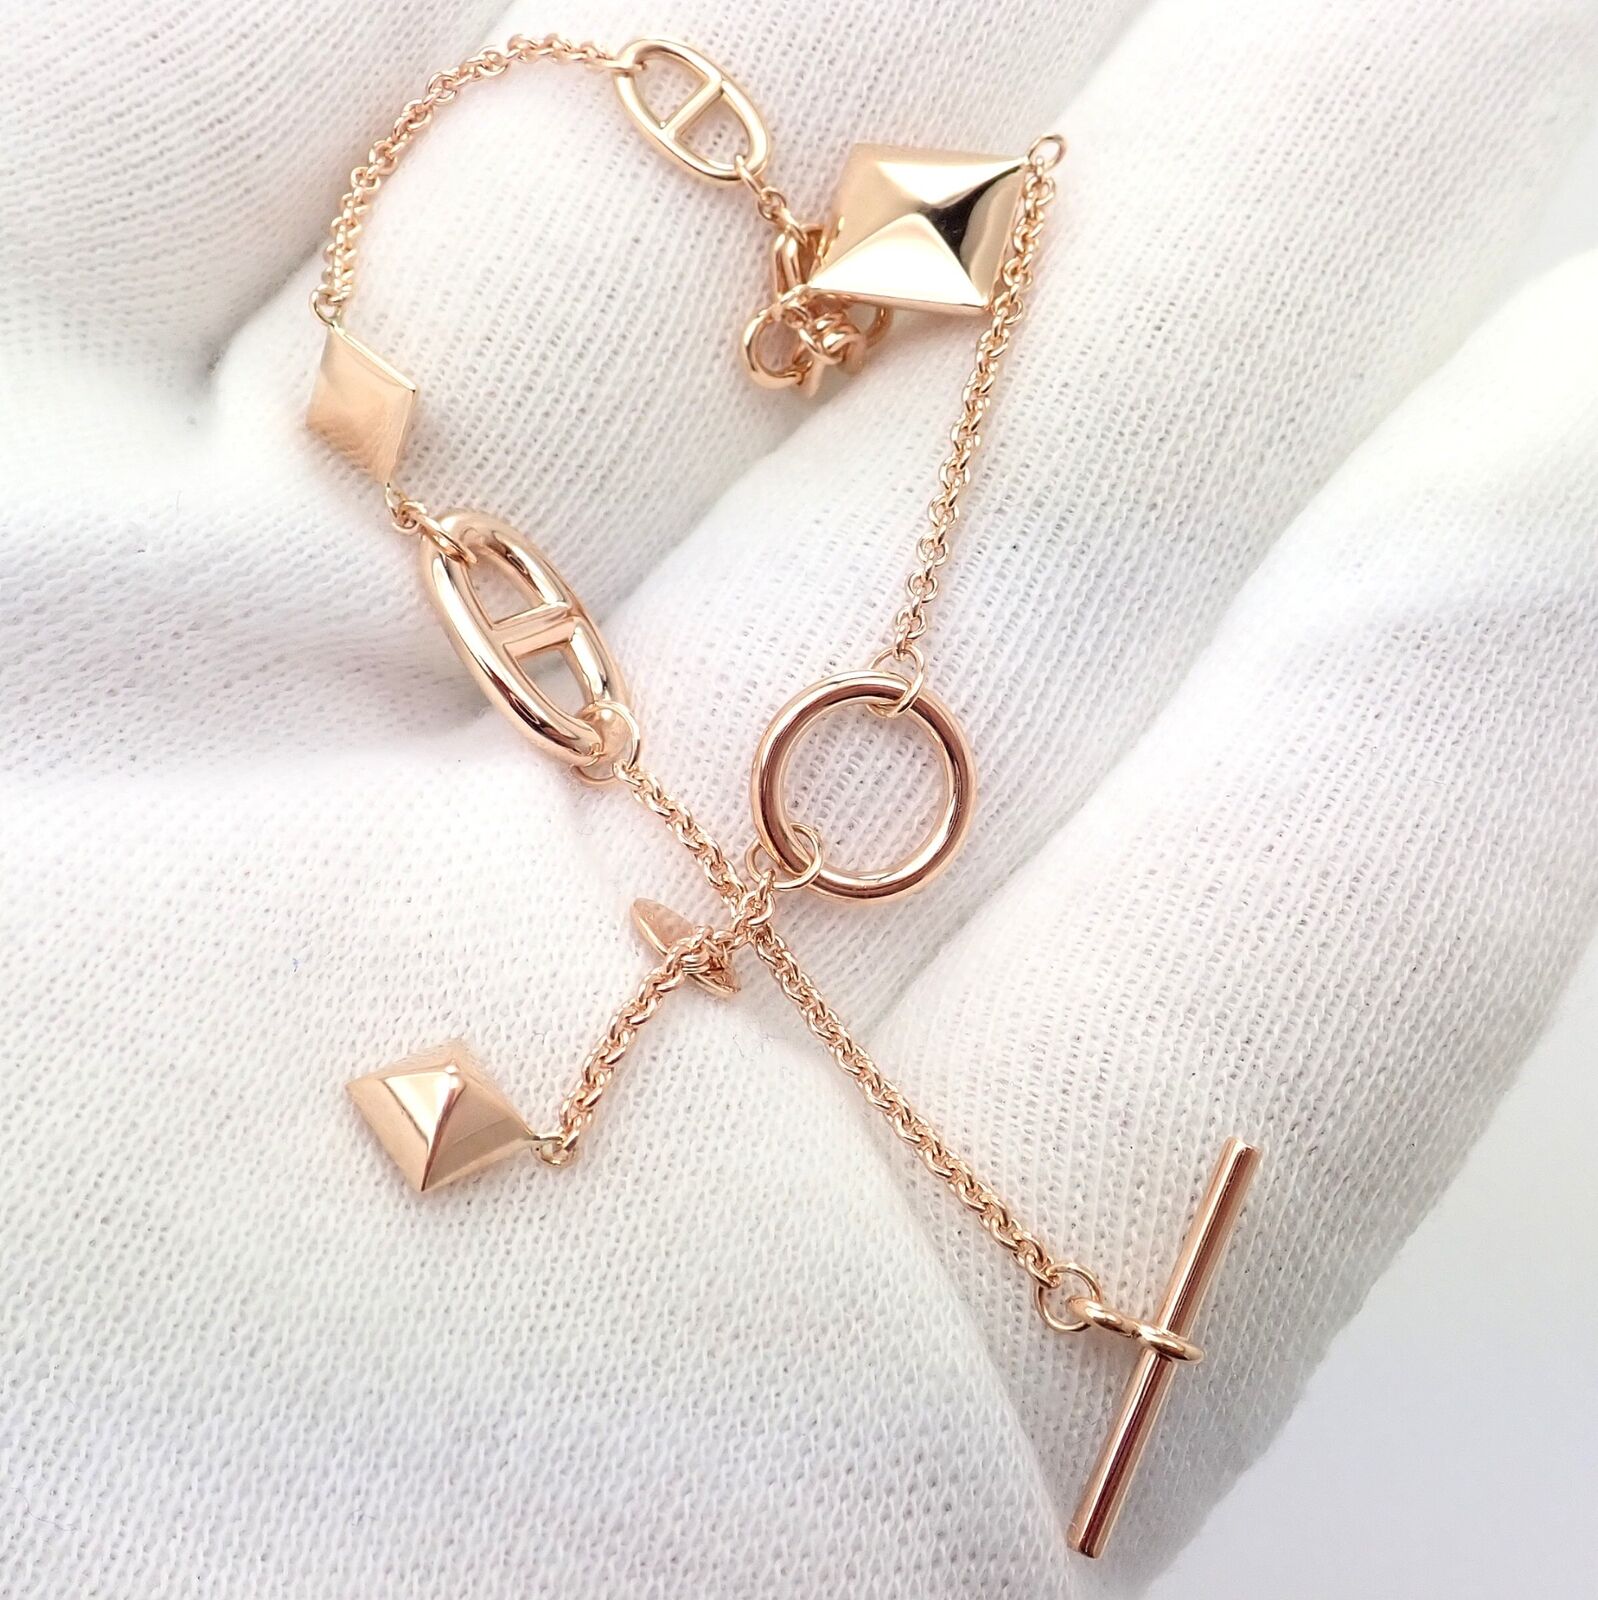 Hermes Jewelry & Watches:Fine Jewelry:Bracelets & Charms Authentic! Hermes 18k Rose Gold Signature Iconic Logos Link Toggle Bracelet